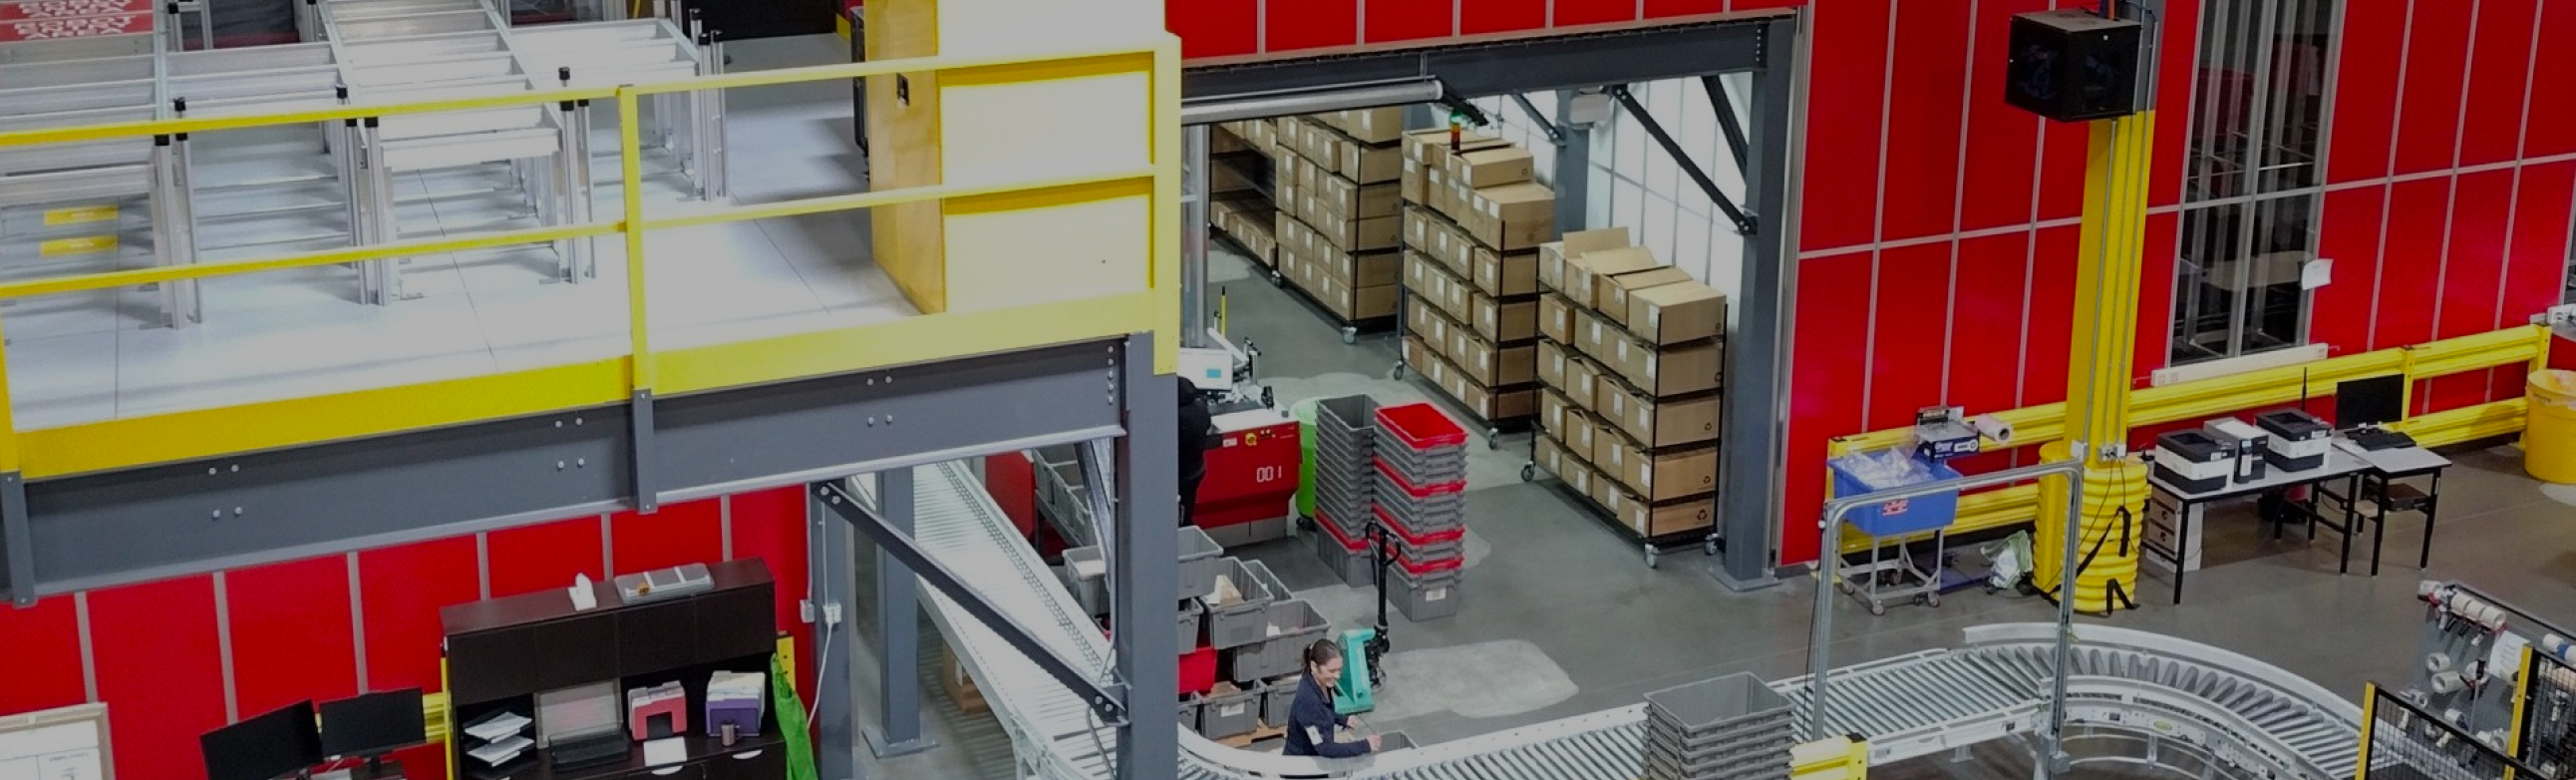 An illustration of the Helly Hansen Warehouse with an AutoStore with conveyor belts